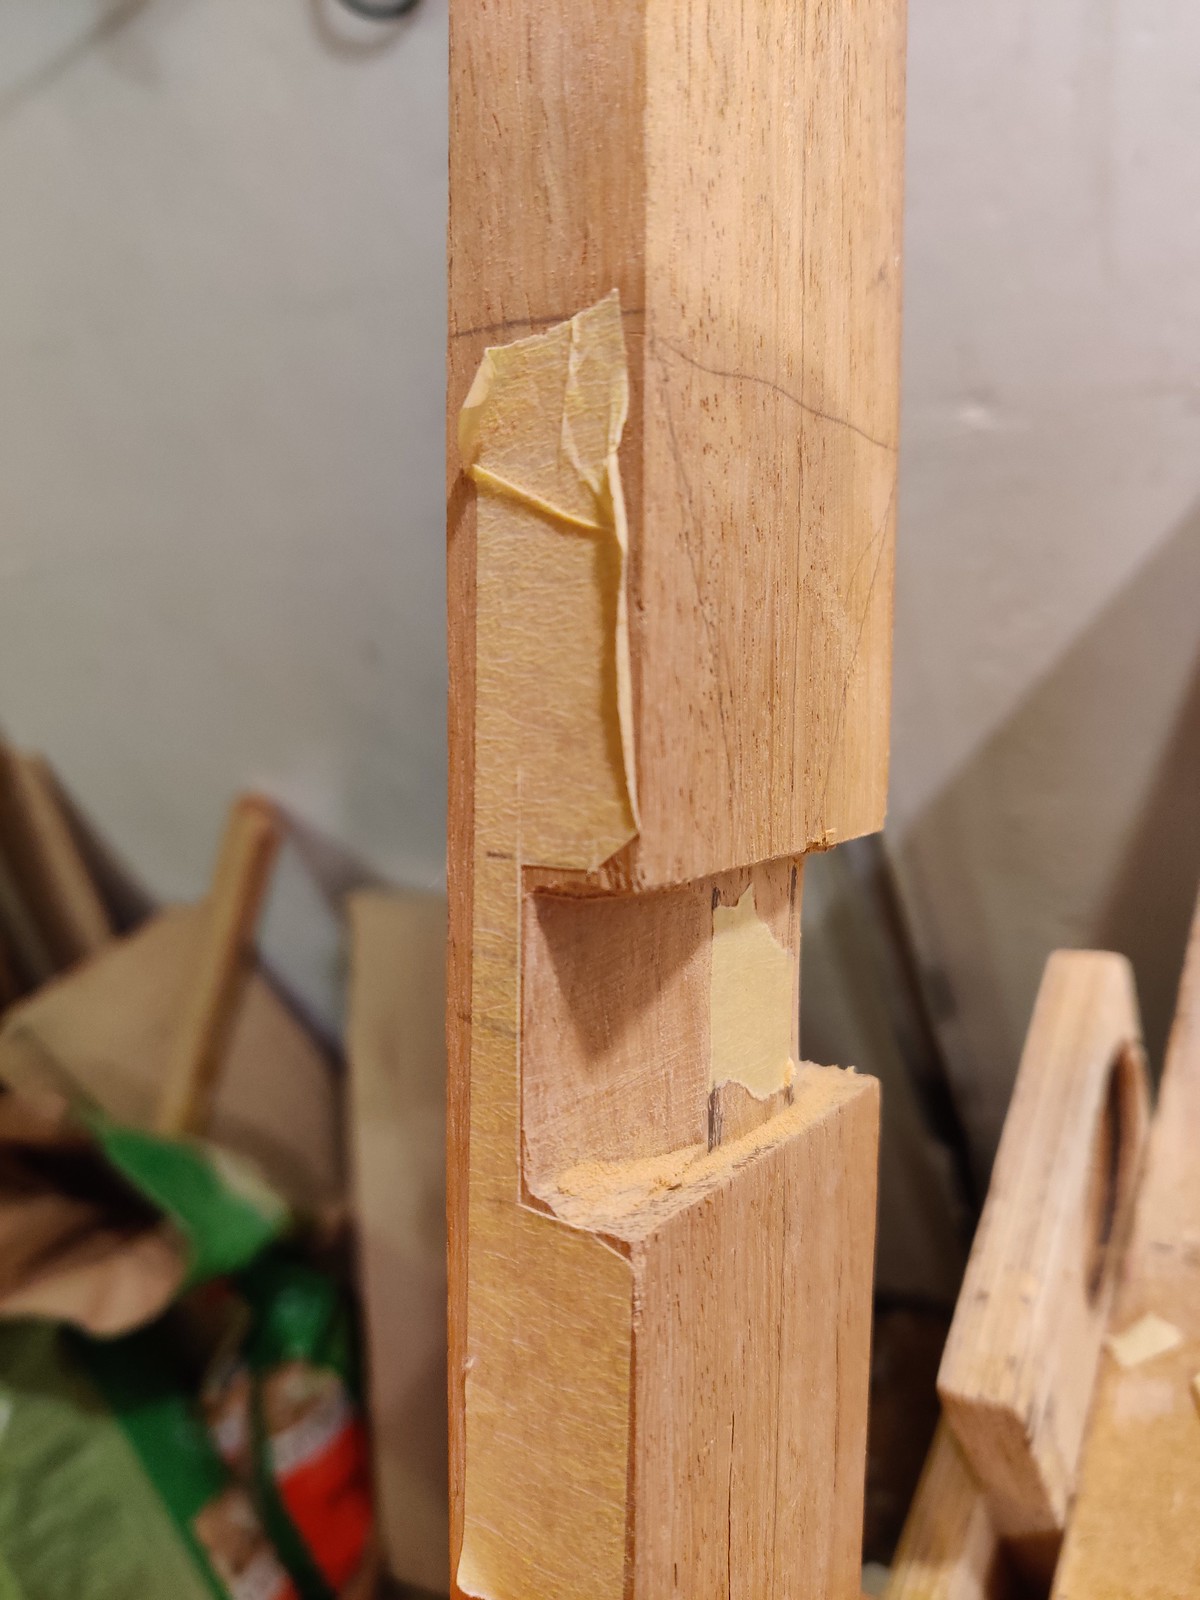 Neck blank with a shape reference cut